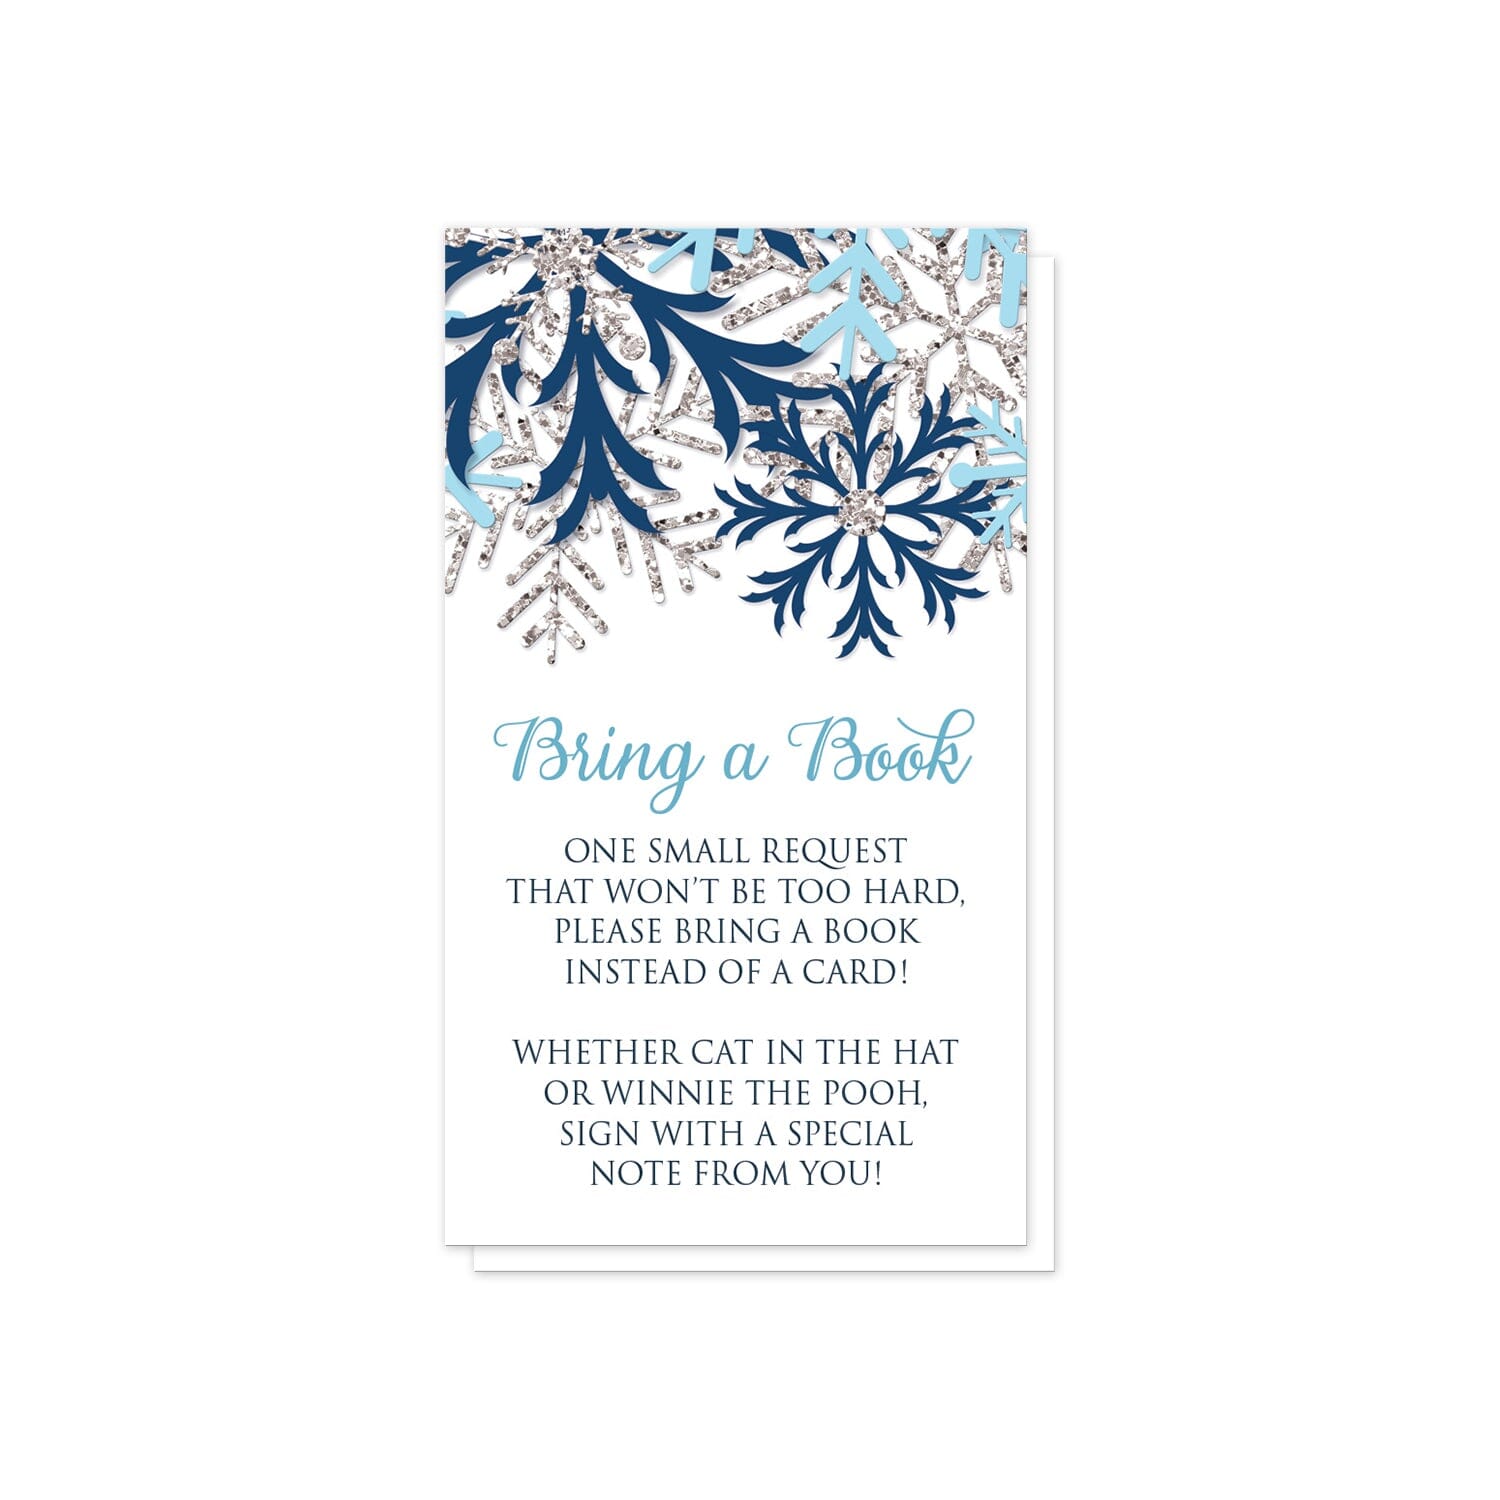 Winter Blue Silver Snowflake Bring a Book Cards at Artistically Invited. Pretty winter blue silver snowflake bring a book cards designed with navy blue, aqua blue, and silver-colored glitter-illustrated snowflakes along the top. Your book request details are printed in blue and navy blue over white below the snowflakes.